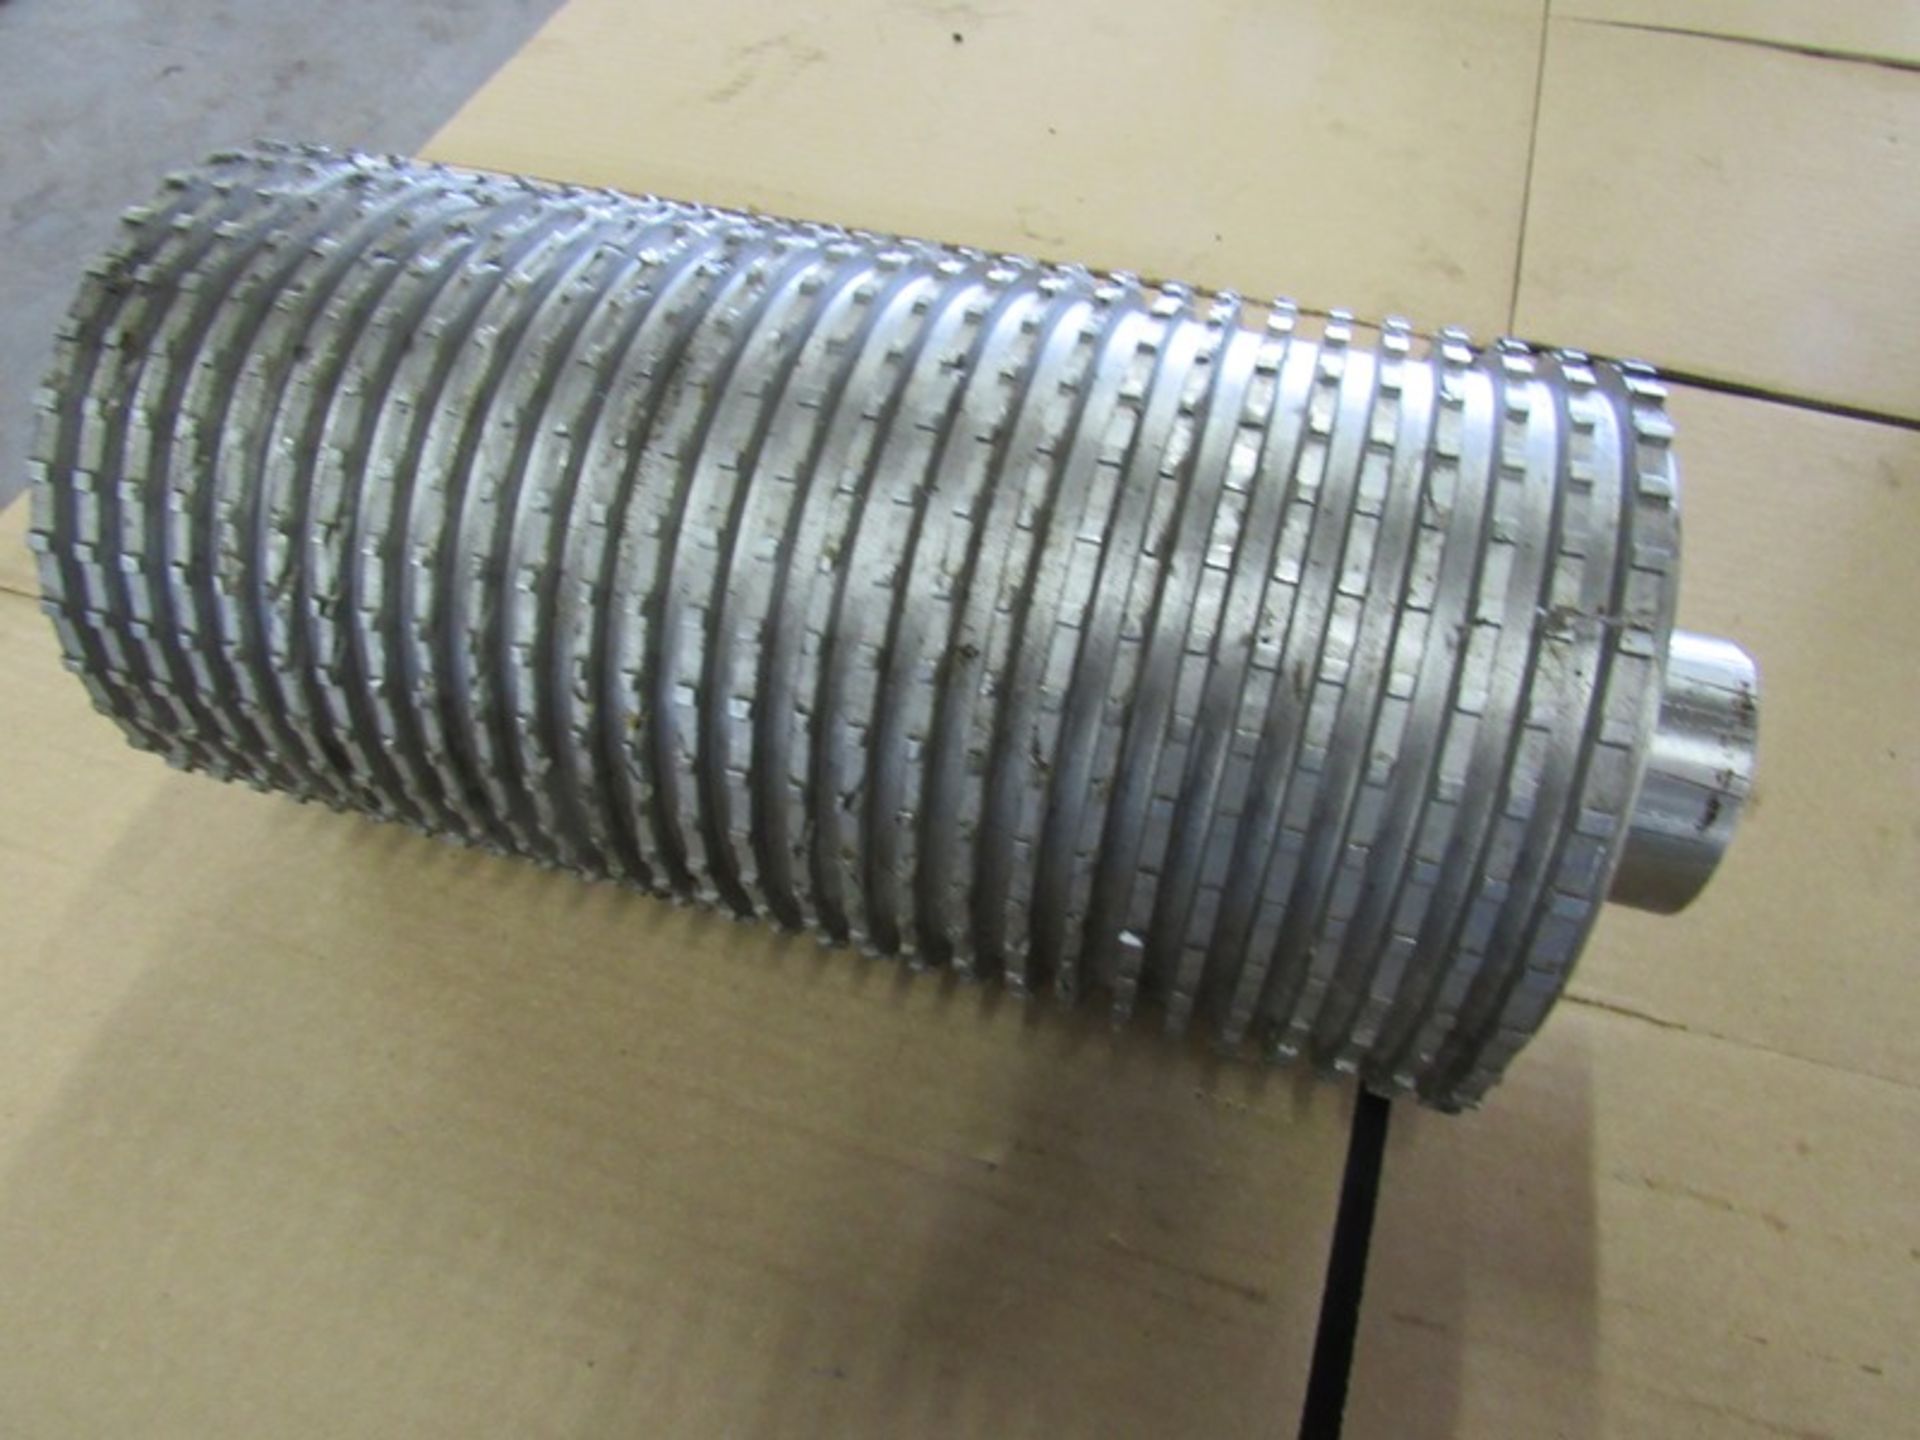 Urschel Drum Roll, 5 1/2 dia. X 10 1/2" X 12 1/2" overall, Part #45428 (Required Loading Fee $10- Pi